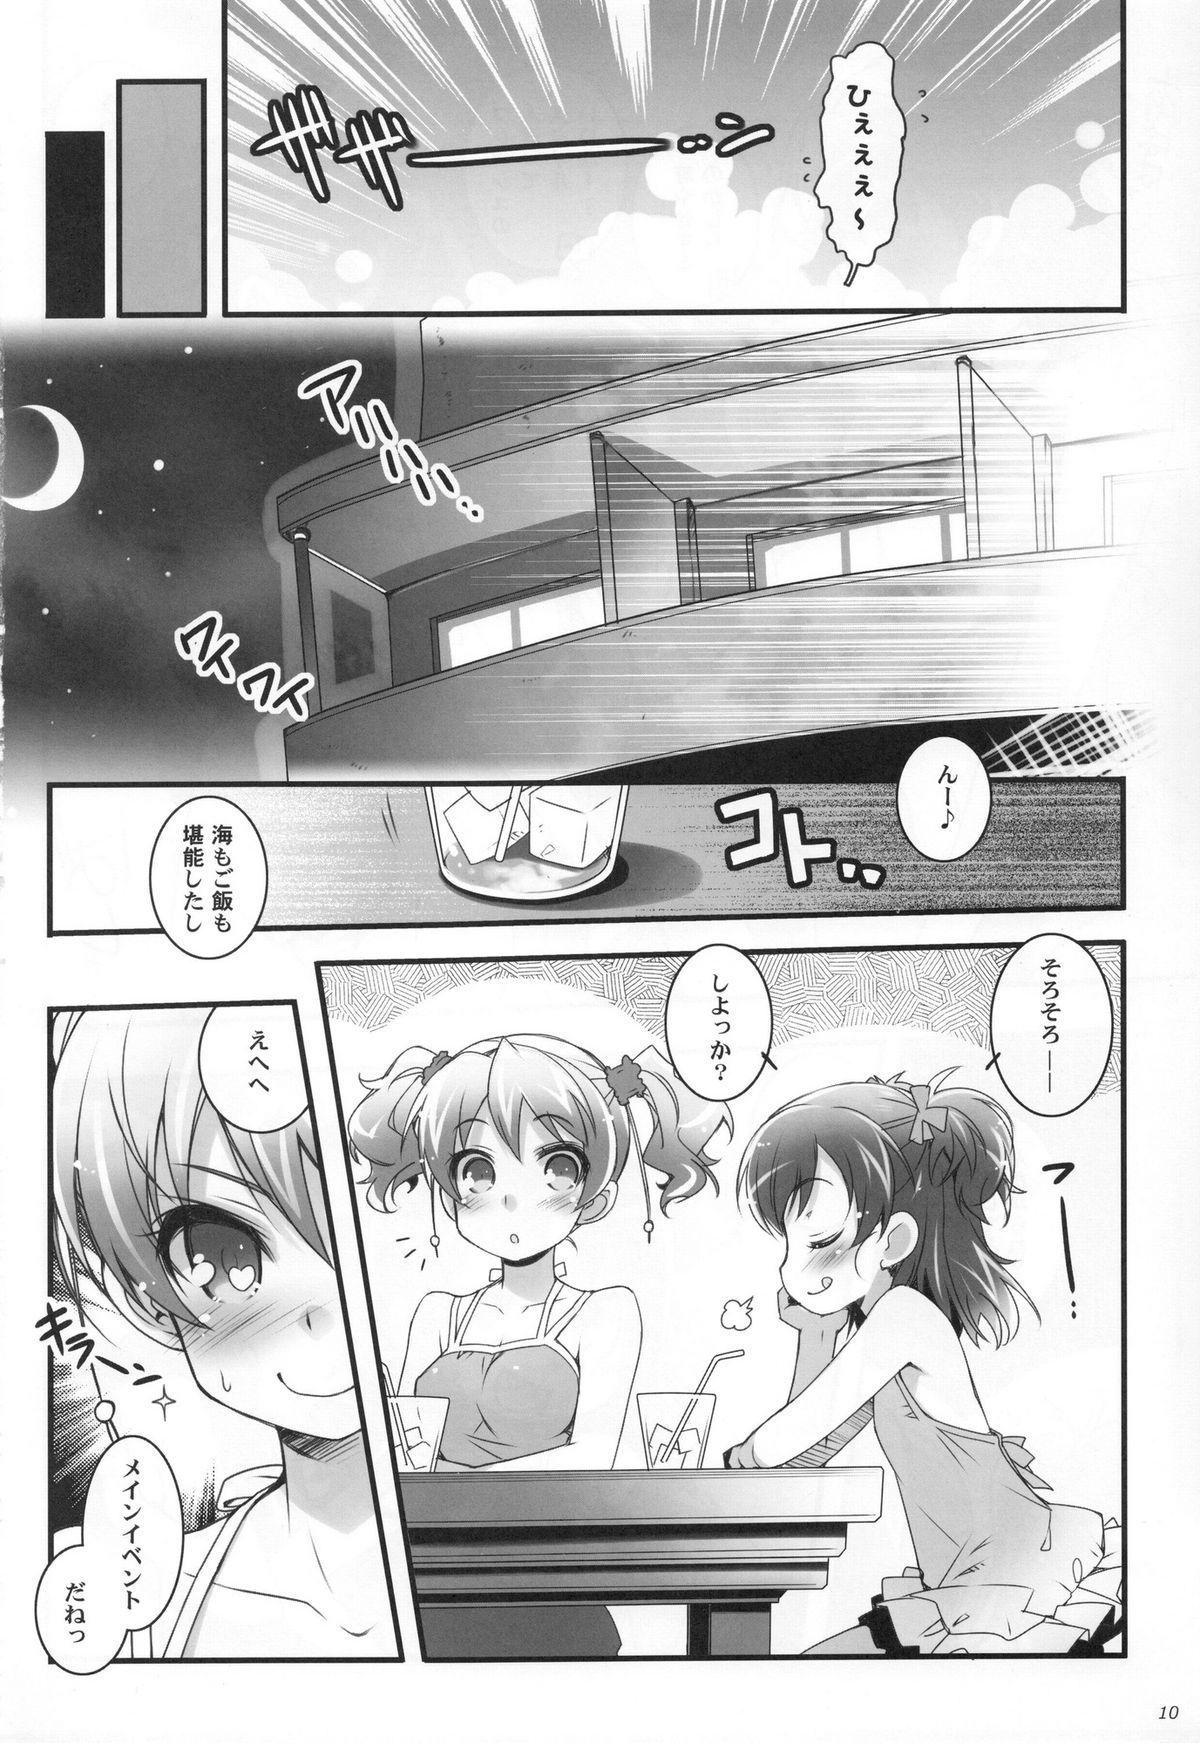 Xxx Sweet Summer Vacation! - Pretty cure Suite precure Gaypawn - Page 10